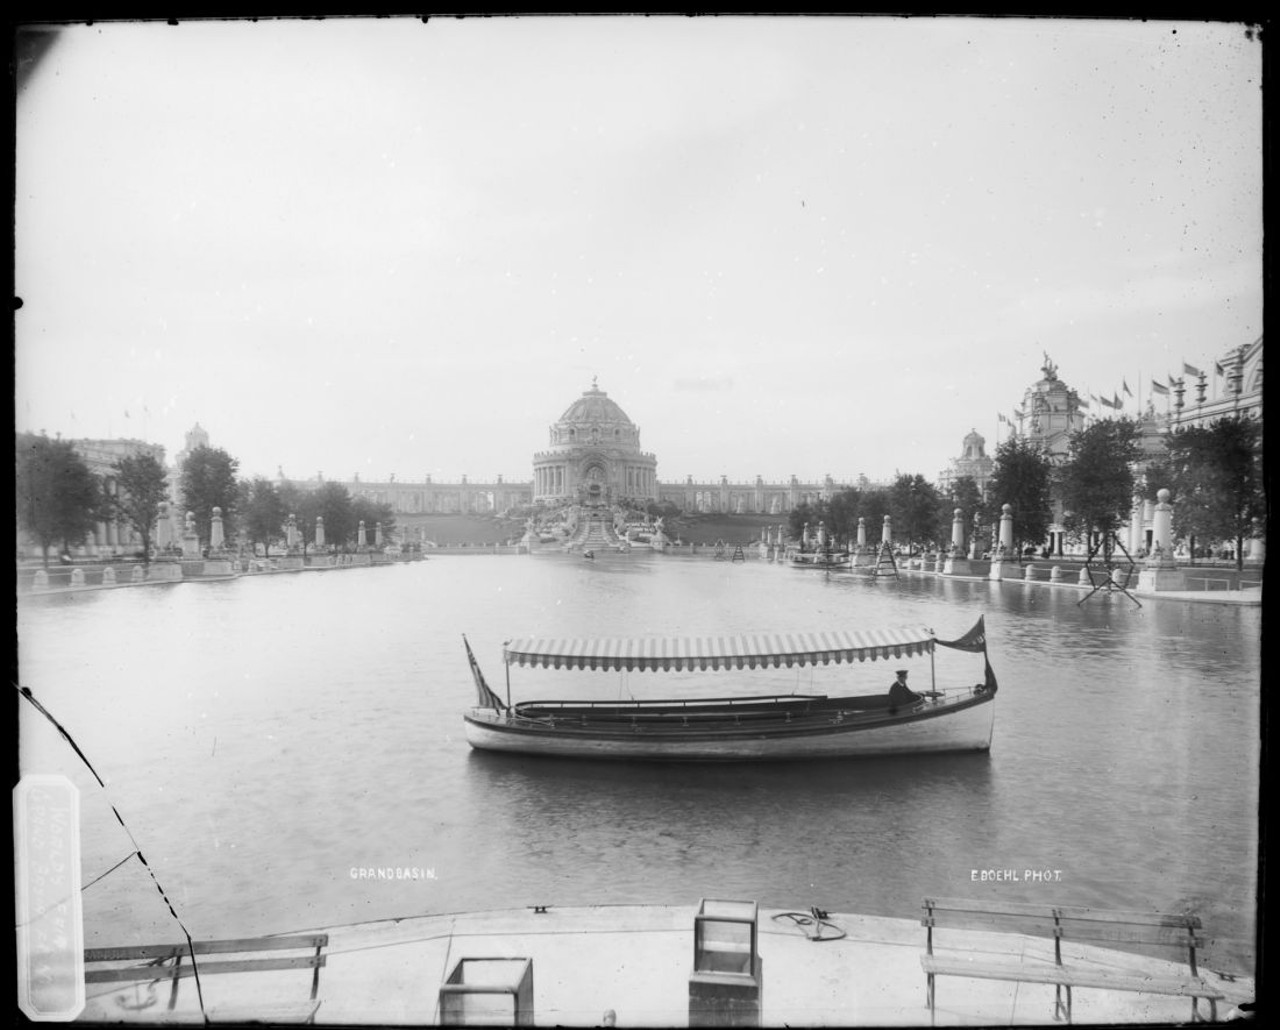 1904 WORLD'S FAIR GRAND BASIN LOOKING SOUTH TOWARDS FESTIVAL HALL
Find out more about this photo at MoHistory.org.